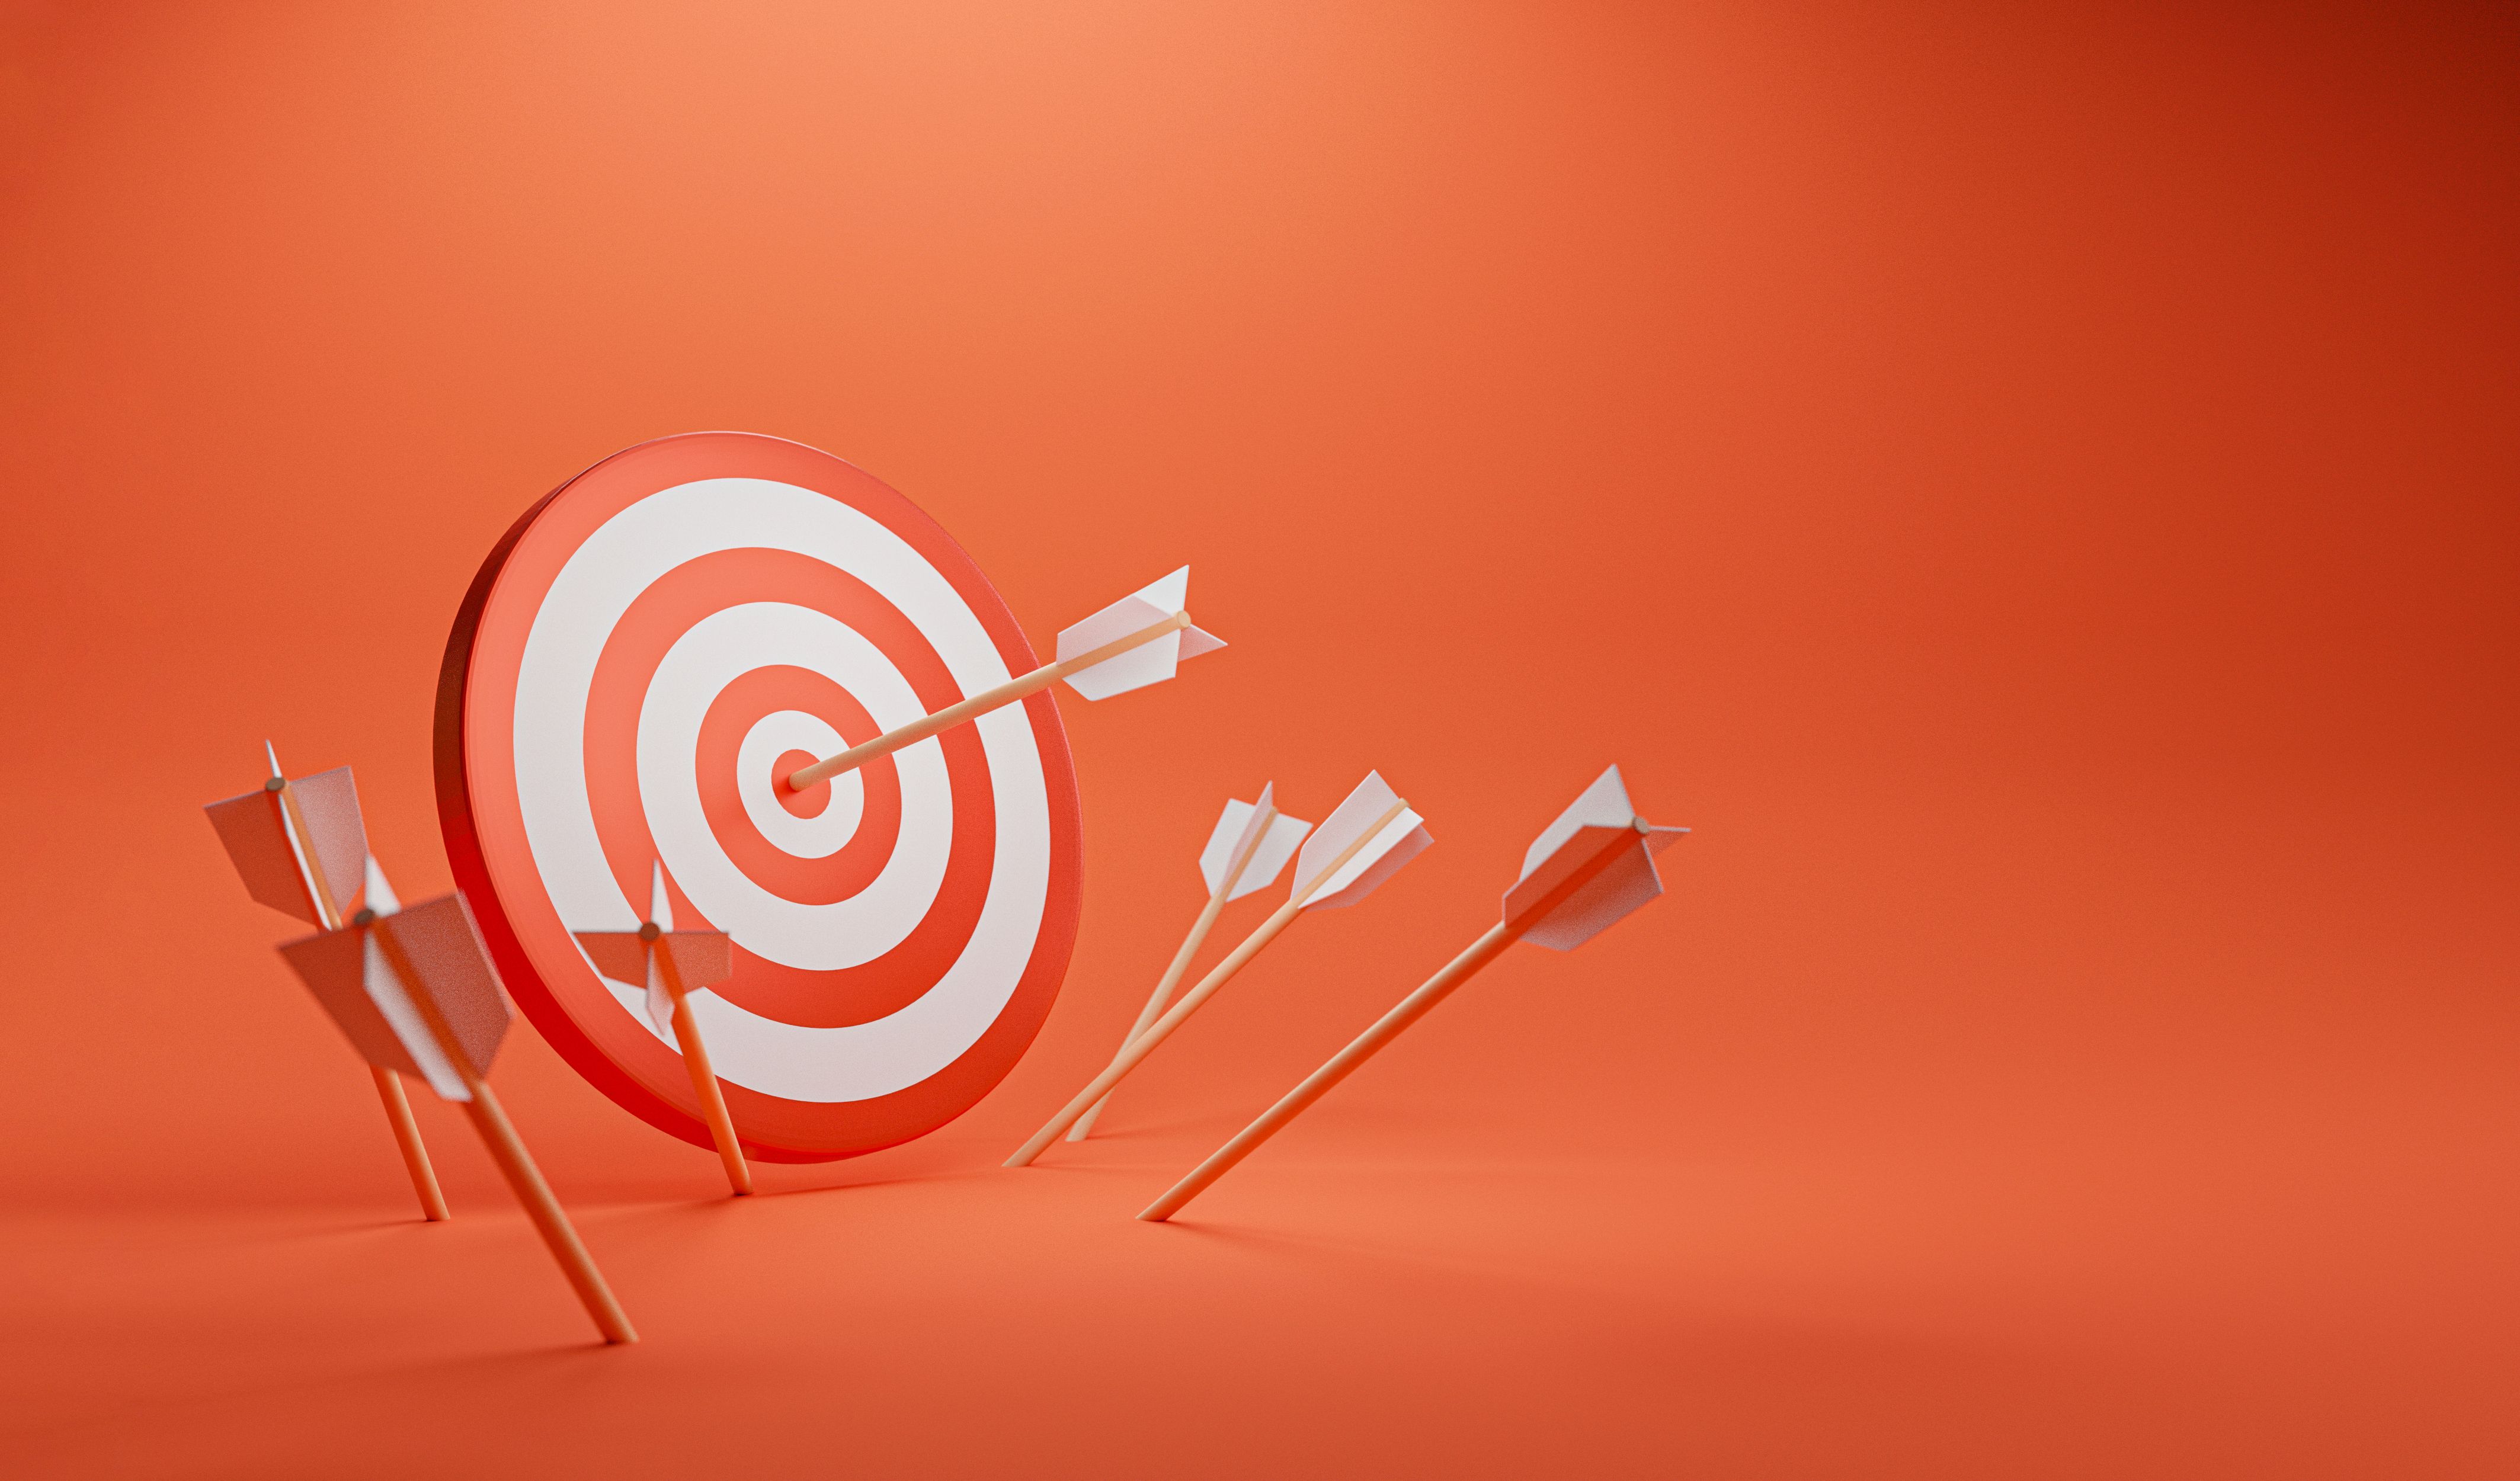 target-board-with-arrow-red-background-copy-space-challenge-setup-business-achievement-goal-objective-target-concept-by-3d-render (1).jpg